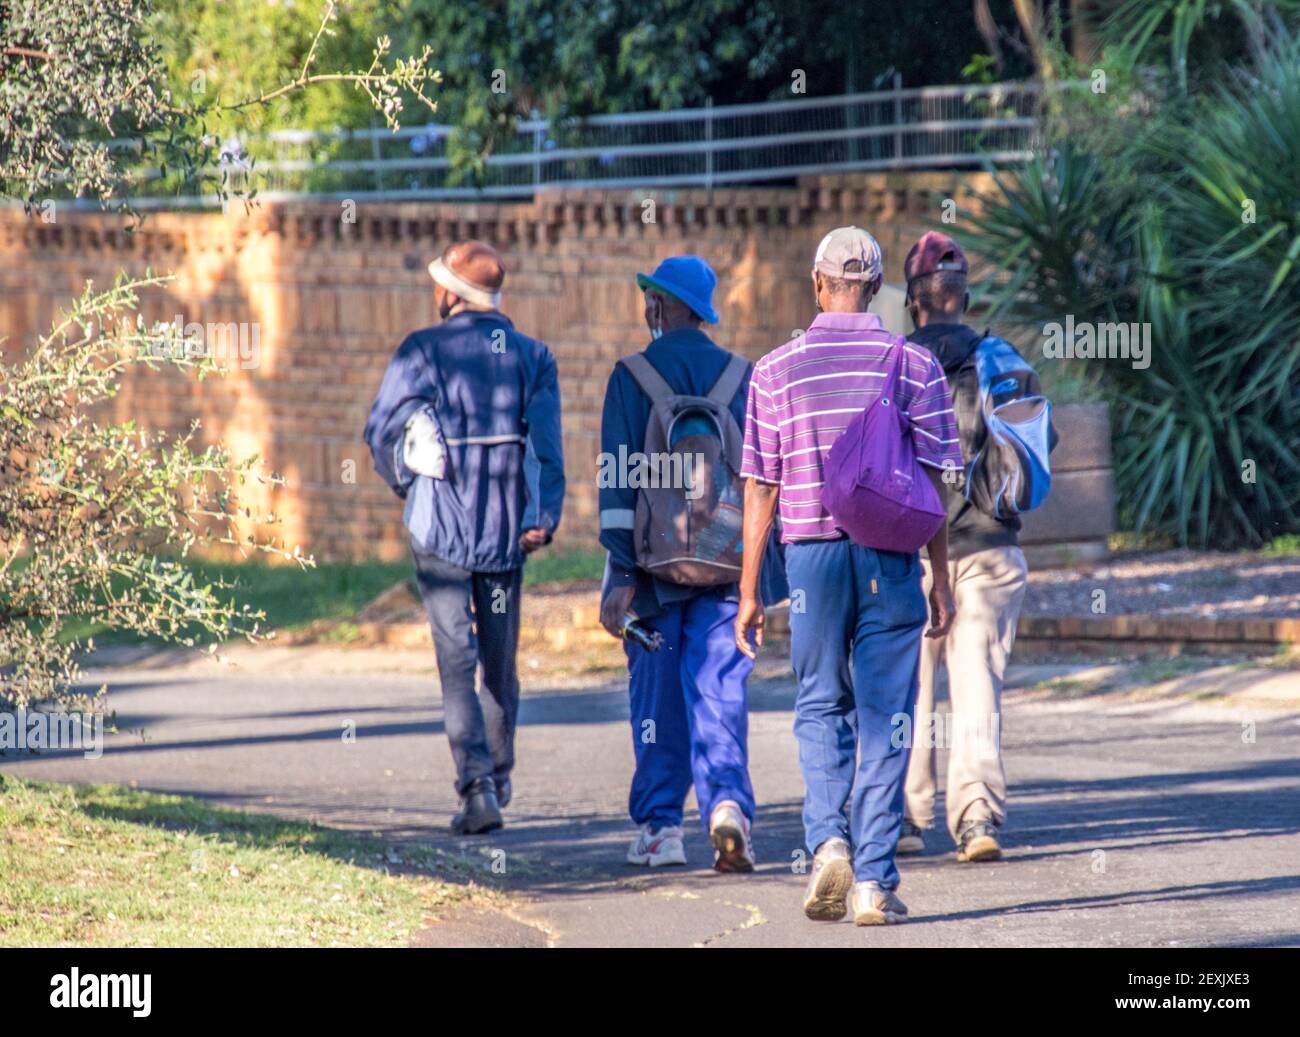 Johannesburg, South Africa - unidentified black workers walk to work as lockdown restrictions for the covid-19 pandemic are relaxed Stock Photo